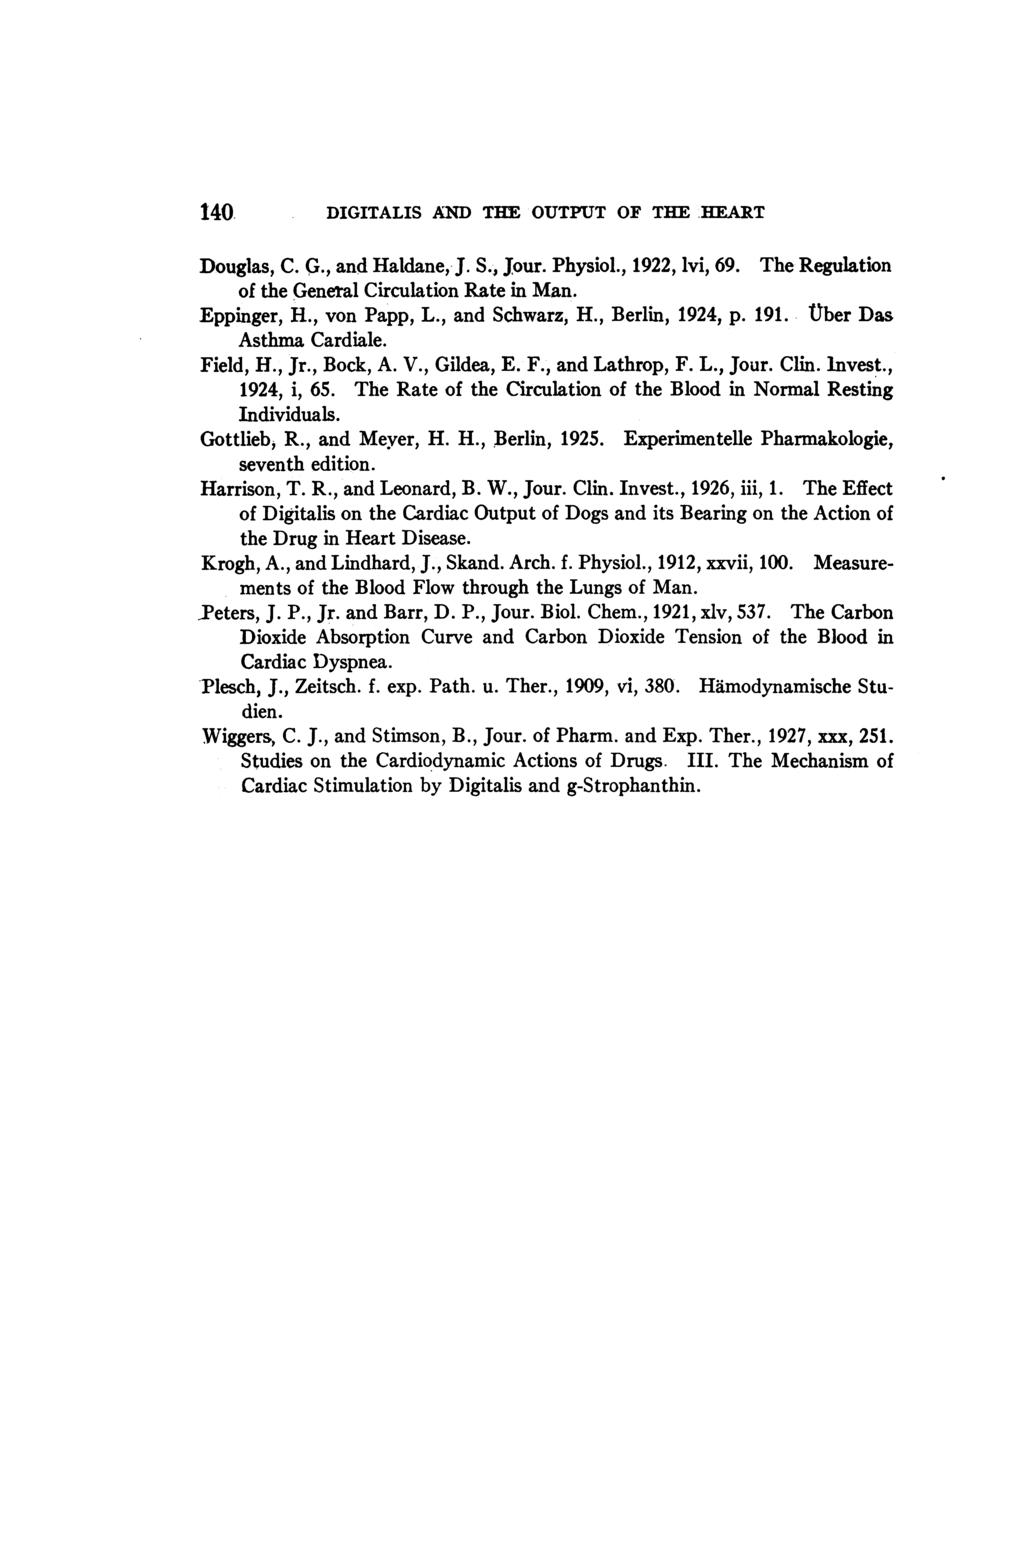 140. DIGITALIS AND THE OUTPUT OF THE HEART Douglas, C. G., and Haldane, J. S., jour. Physiol., 1922, lvi, 69. The Regulation of the General Circulation Rate in Man. Eppinger, H., von Papp, L.